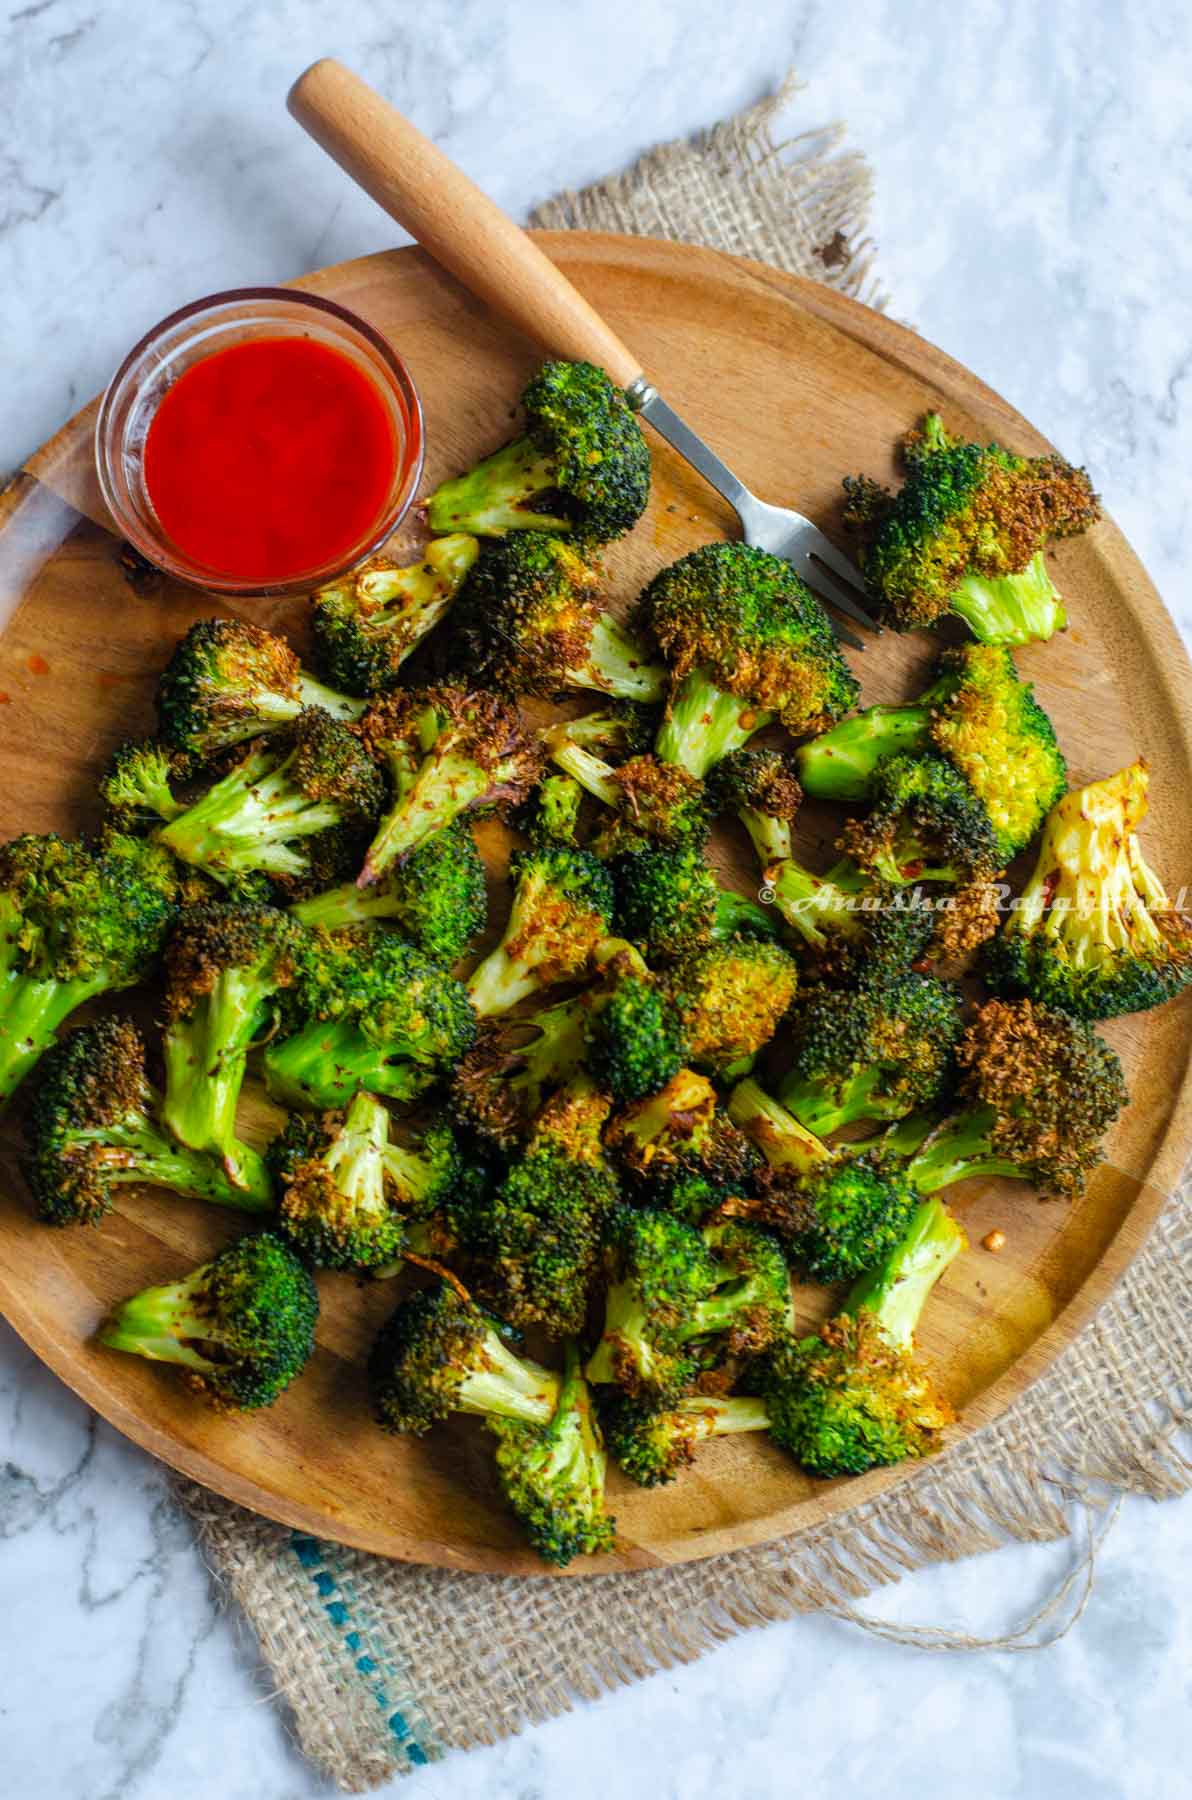 air fried broccoli served on a round wooden plate with a small pinch bowl of sriracha sauce and a wooden handled steel spoon